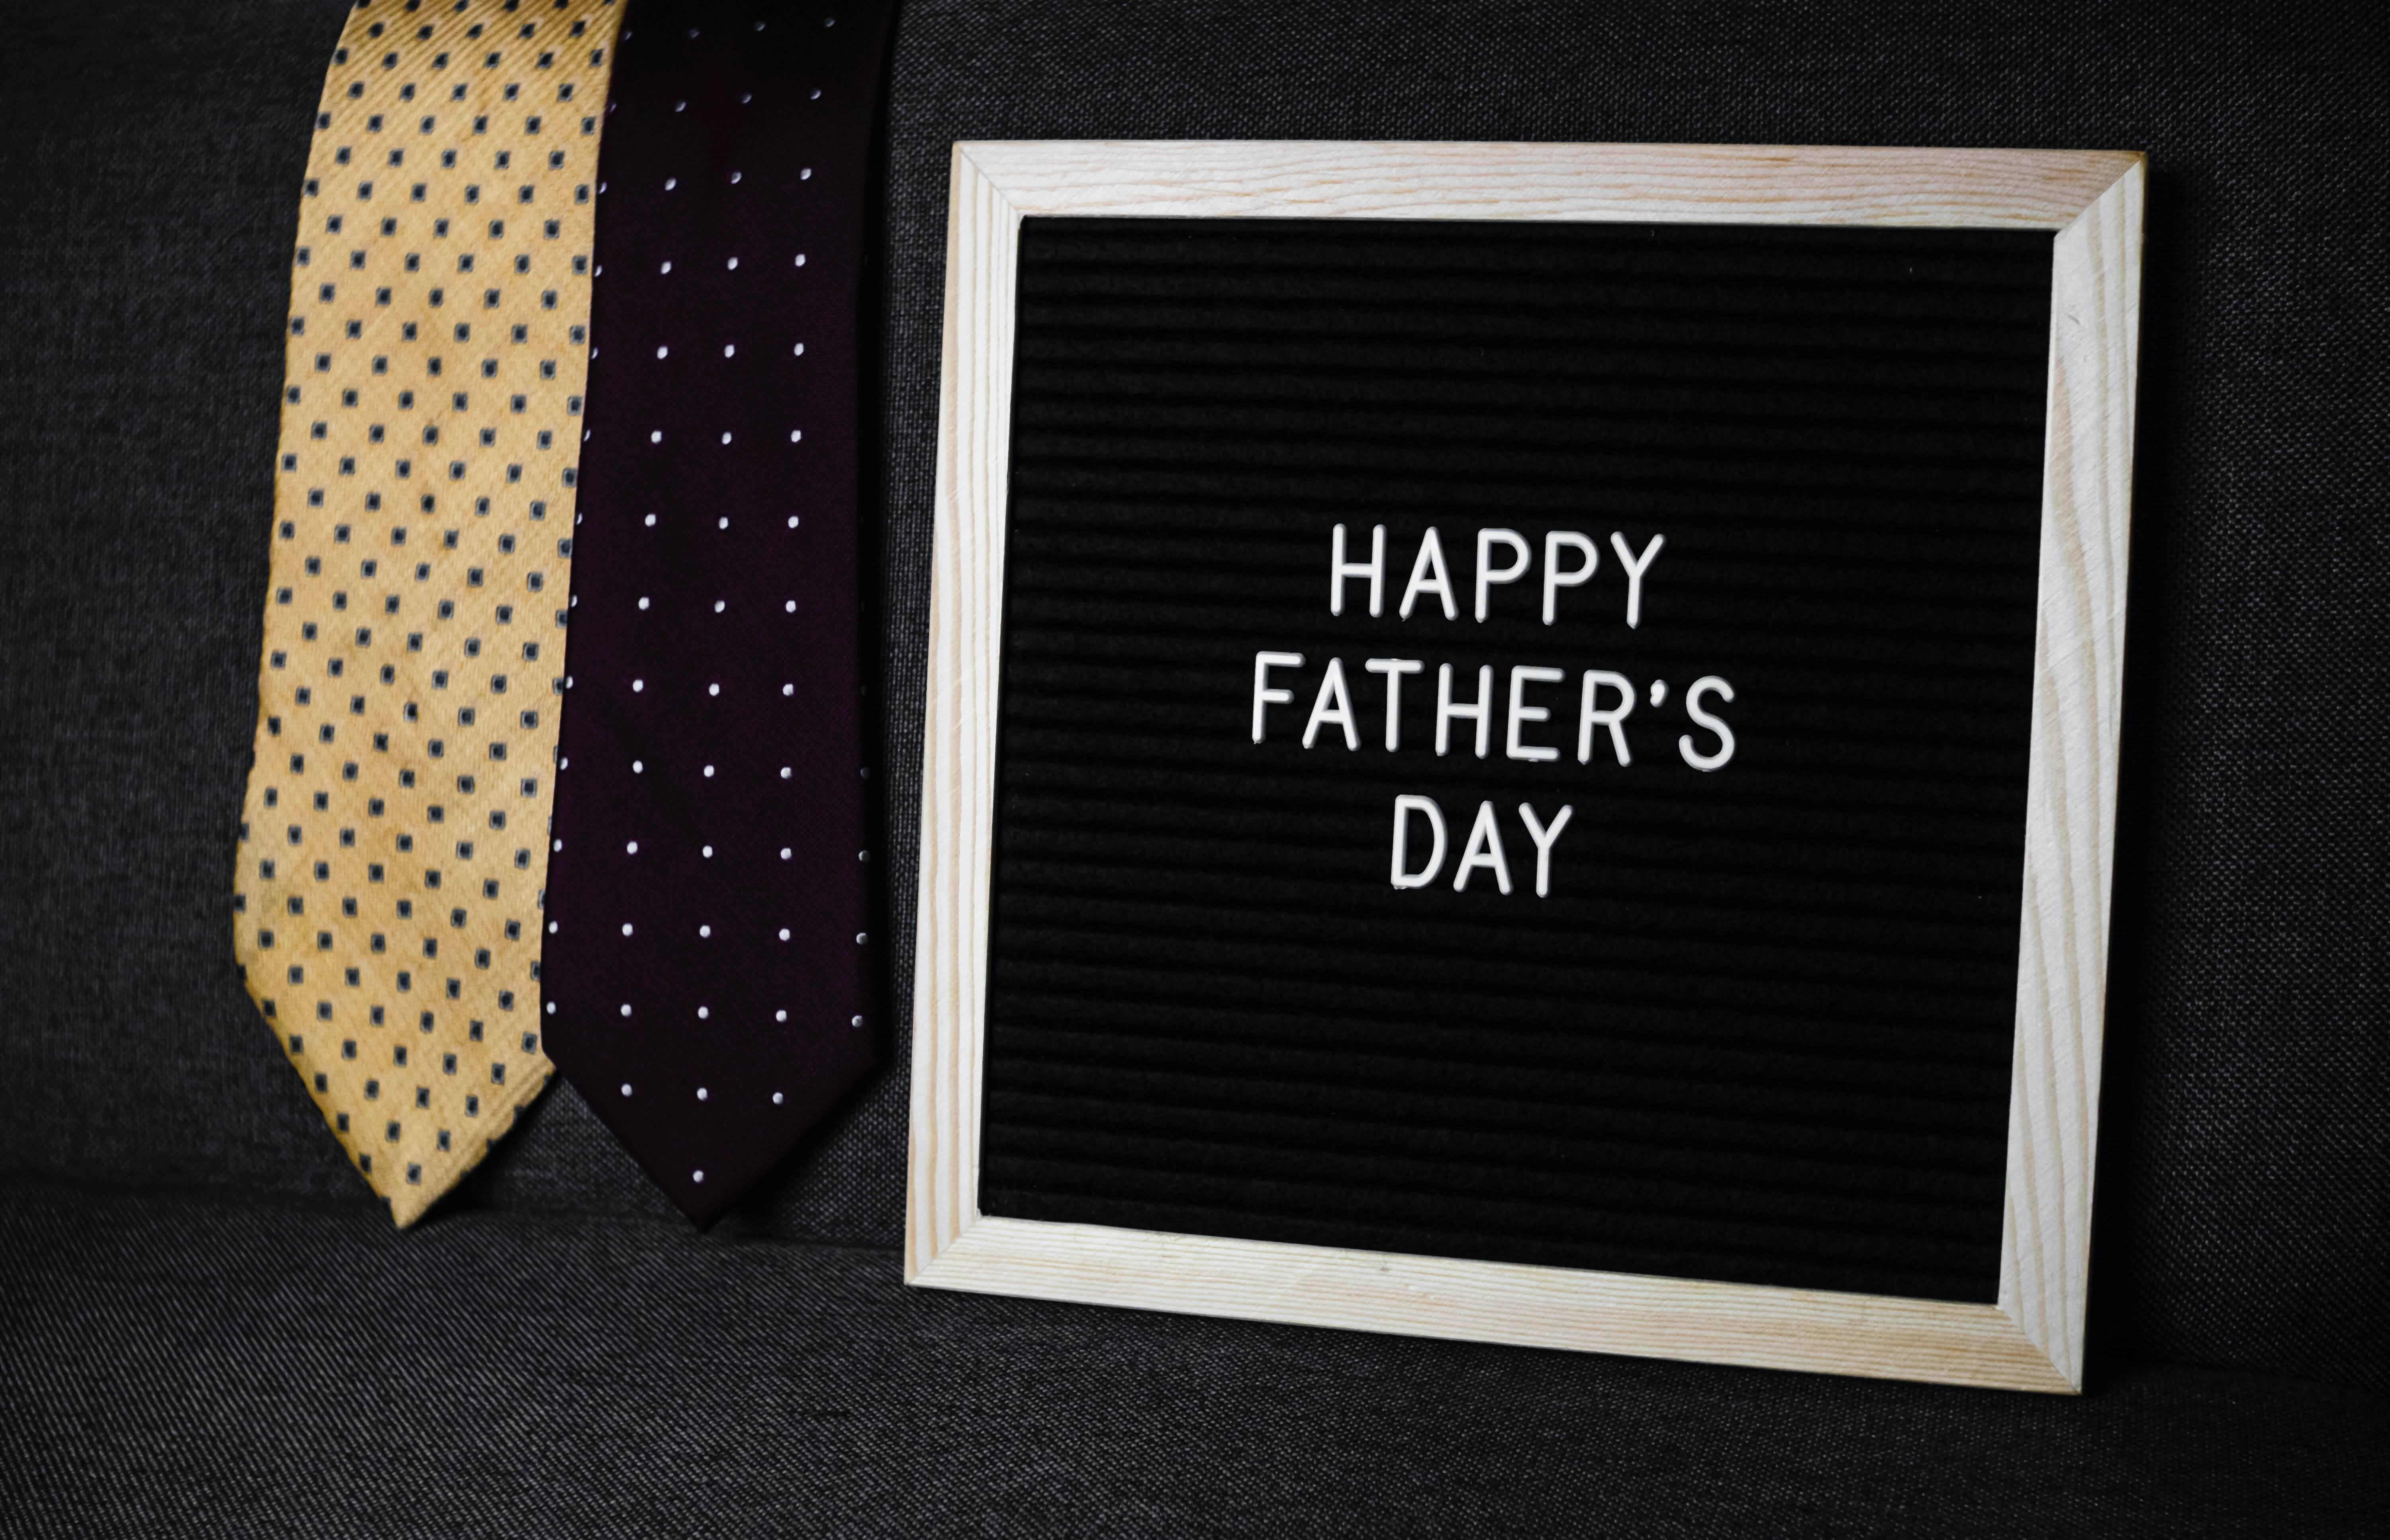 Polka dot ties and a photo frame for father's day